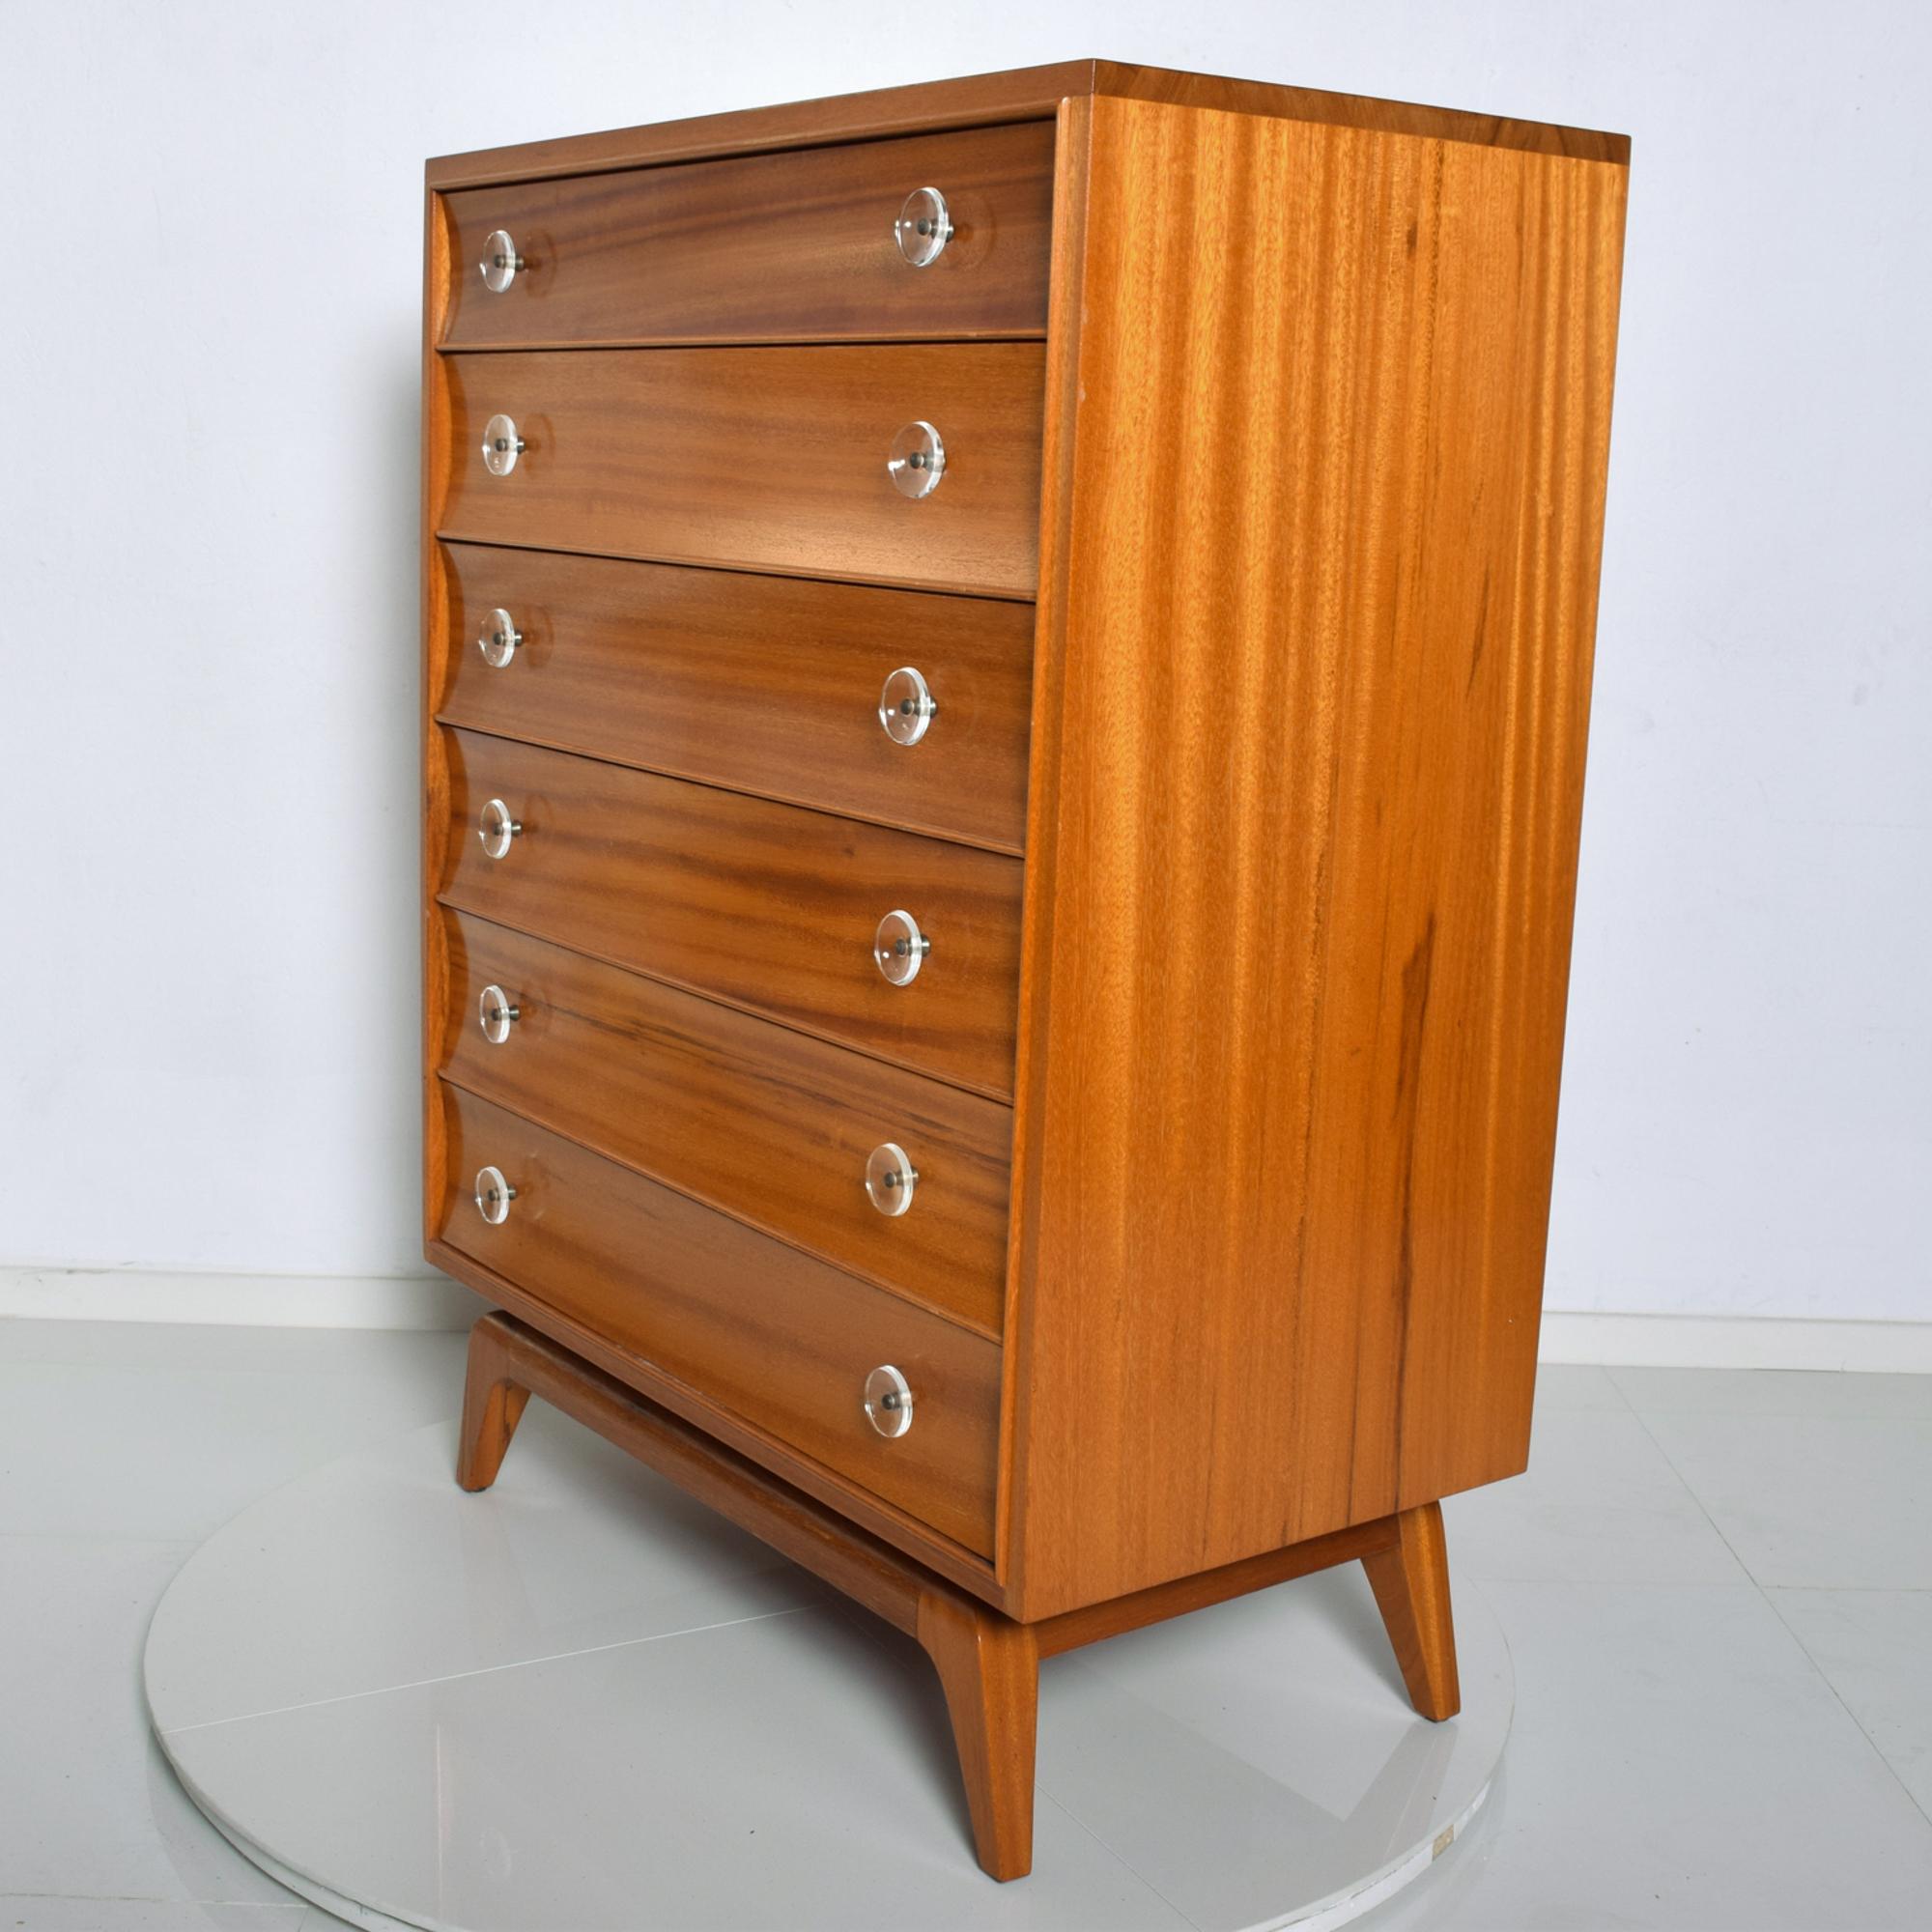 Dresser
Gilbert Rohde rare Art Deco dresser in sapele wood with Lucite pulls and sculptural flared legs.
Sweet simplicity.
Dimensions are: 47 H x 35 W x 20 D
Original unrestored preowned vintage condition.
Please review the images. Delivery to LA.
 